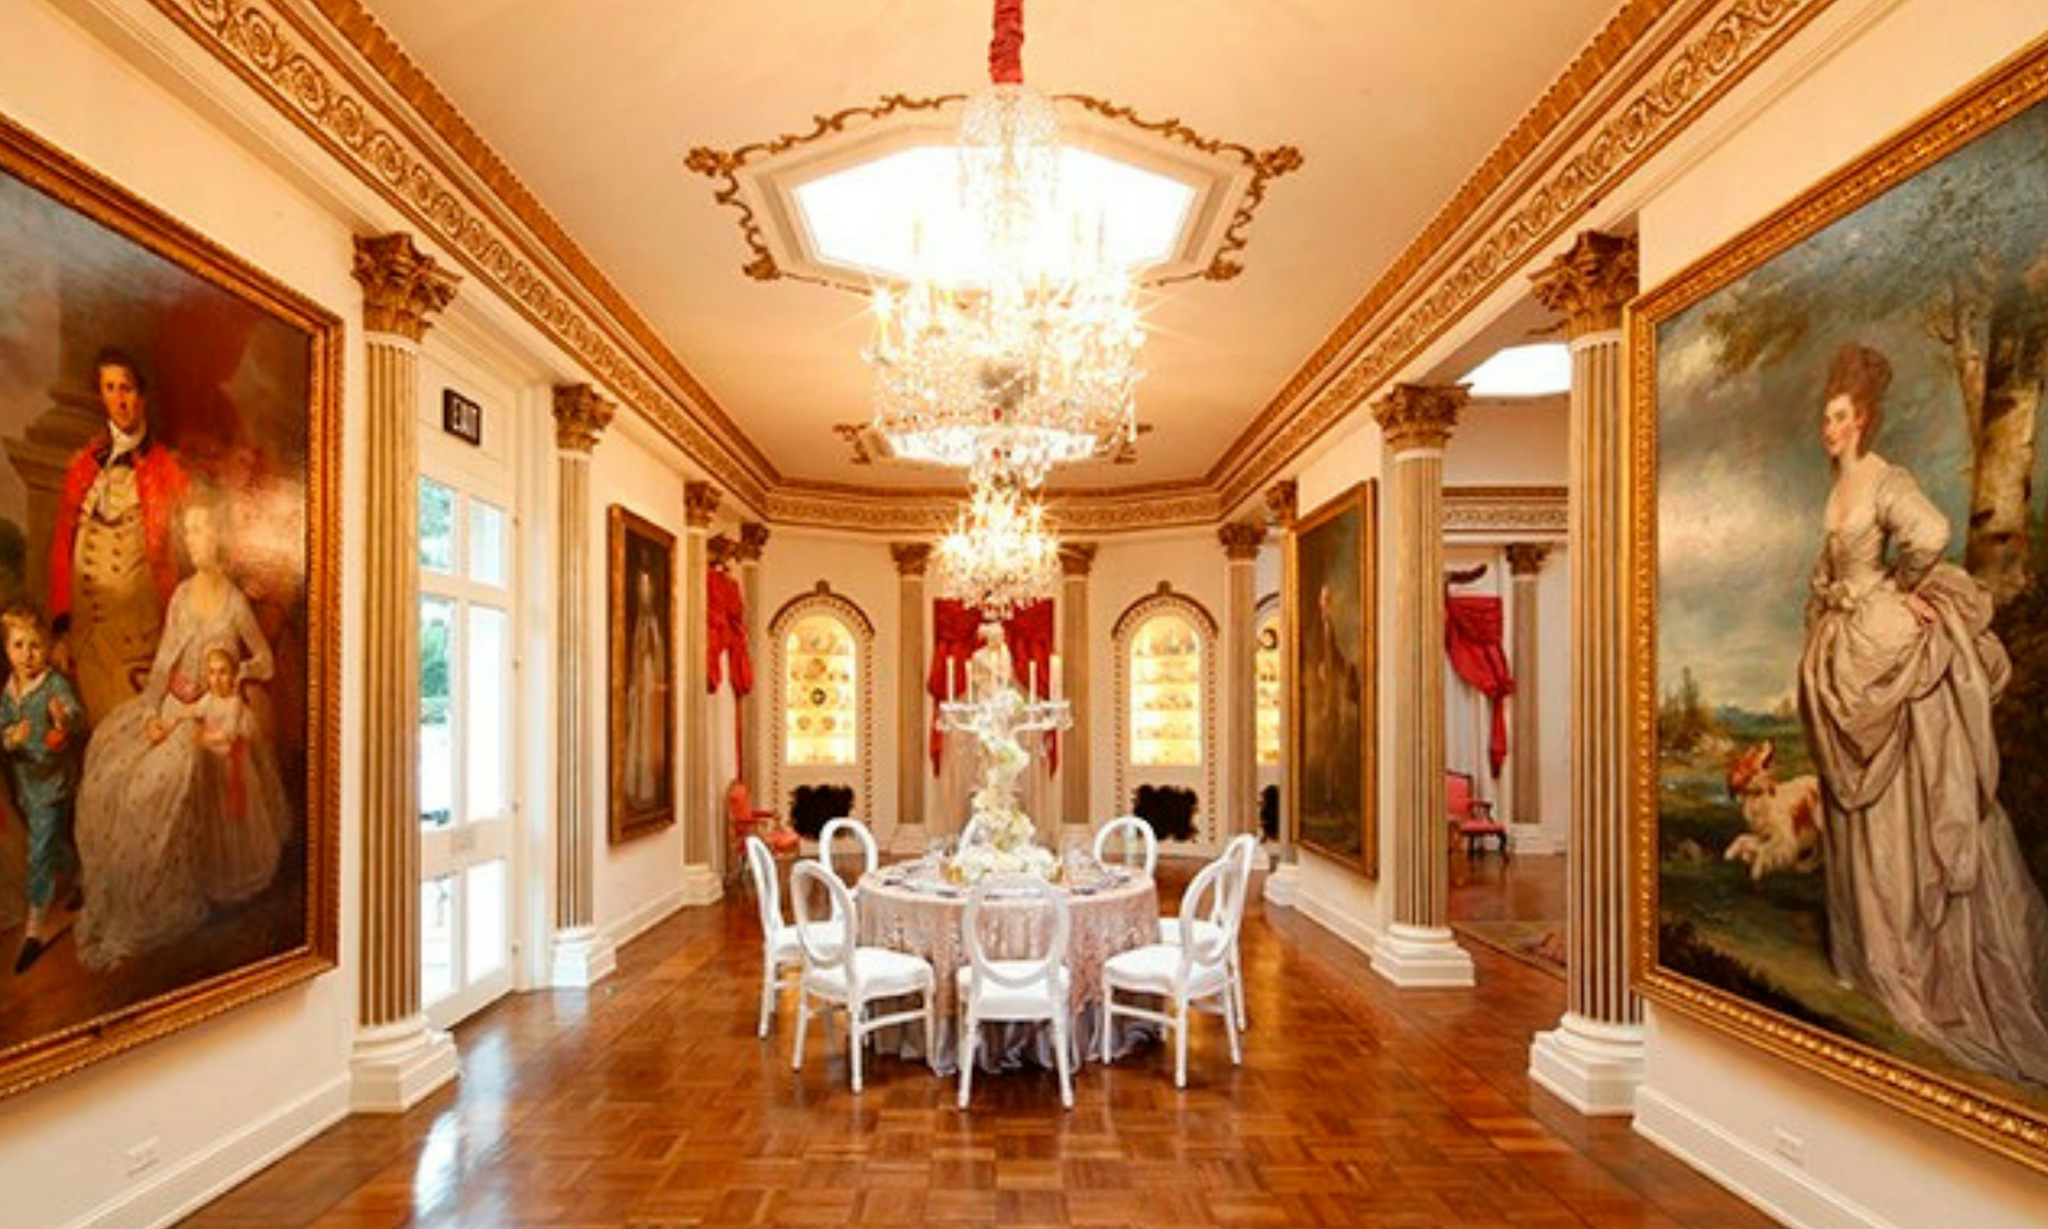 Museum venue with wall paintings at Museum of Fine Arts, Houston